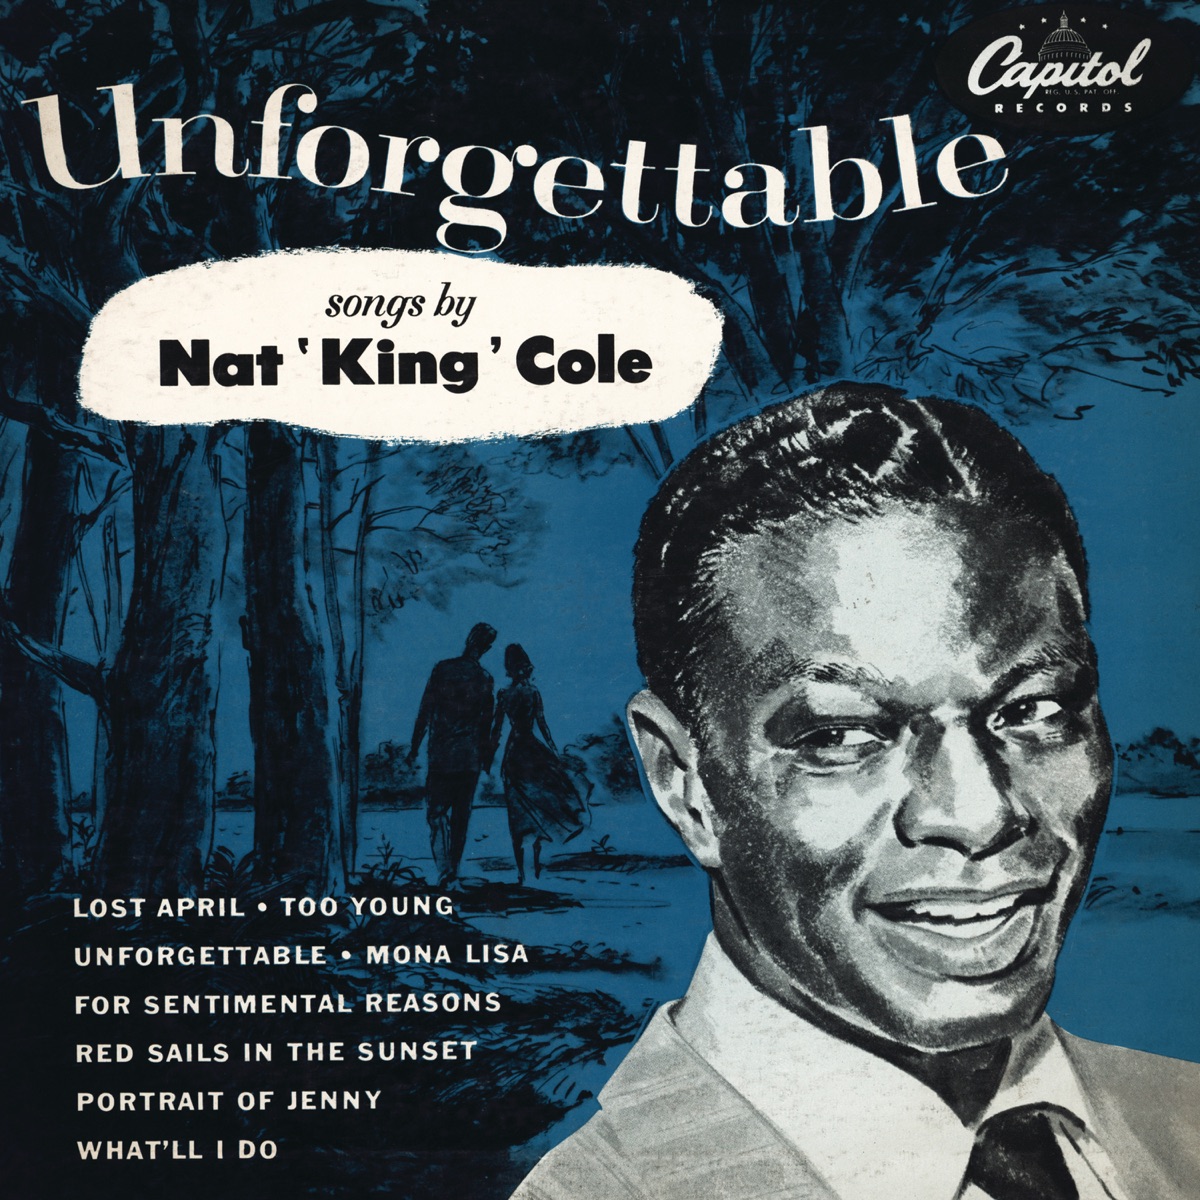 ‎Unforgettable by Nat "King" Cole on Apple Music